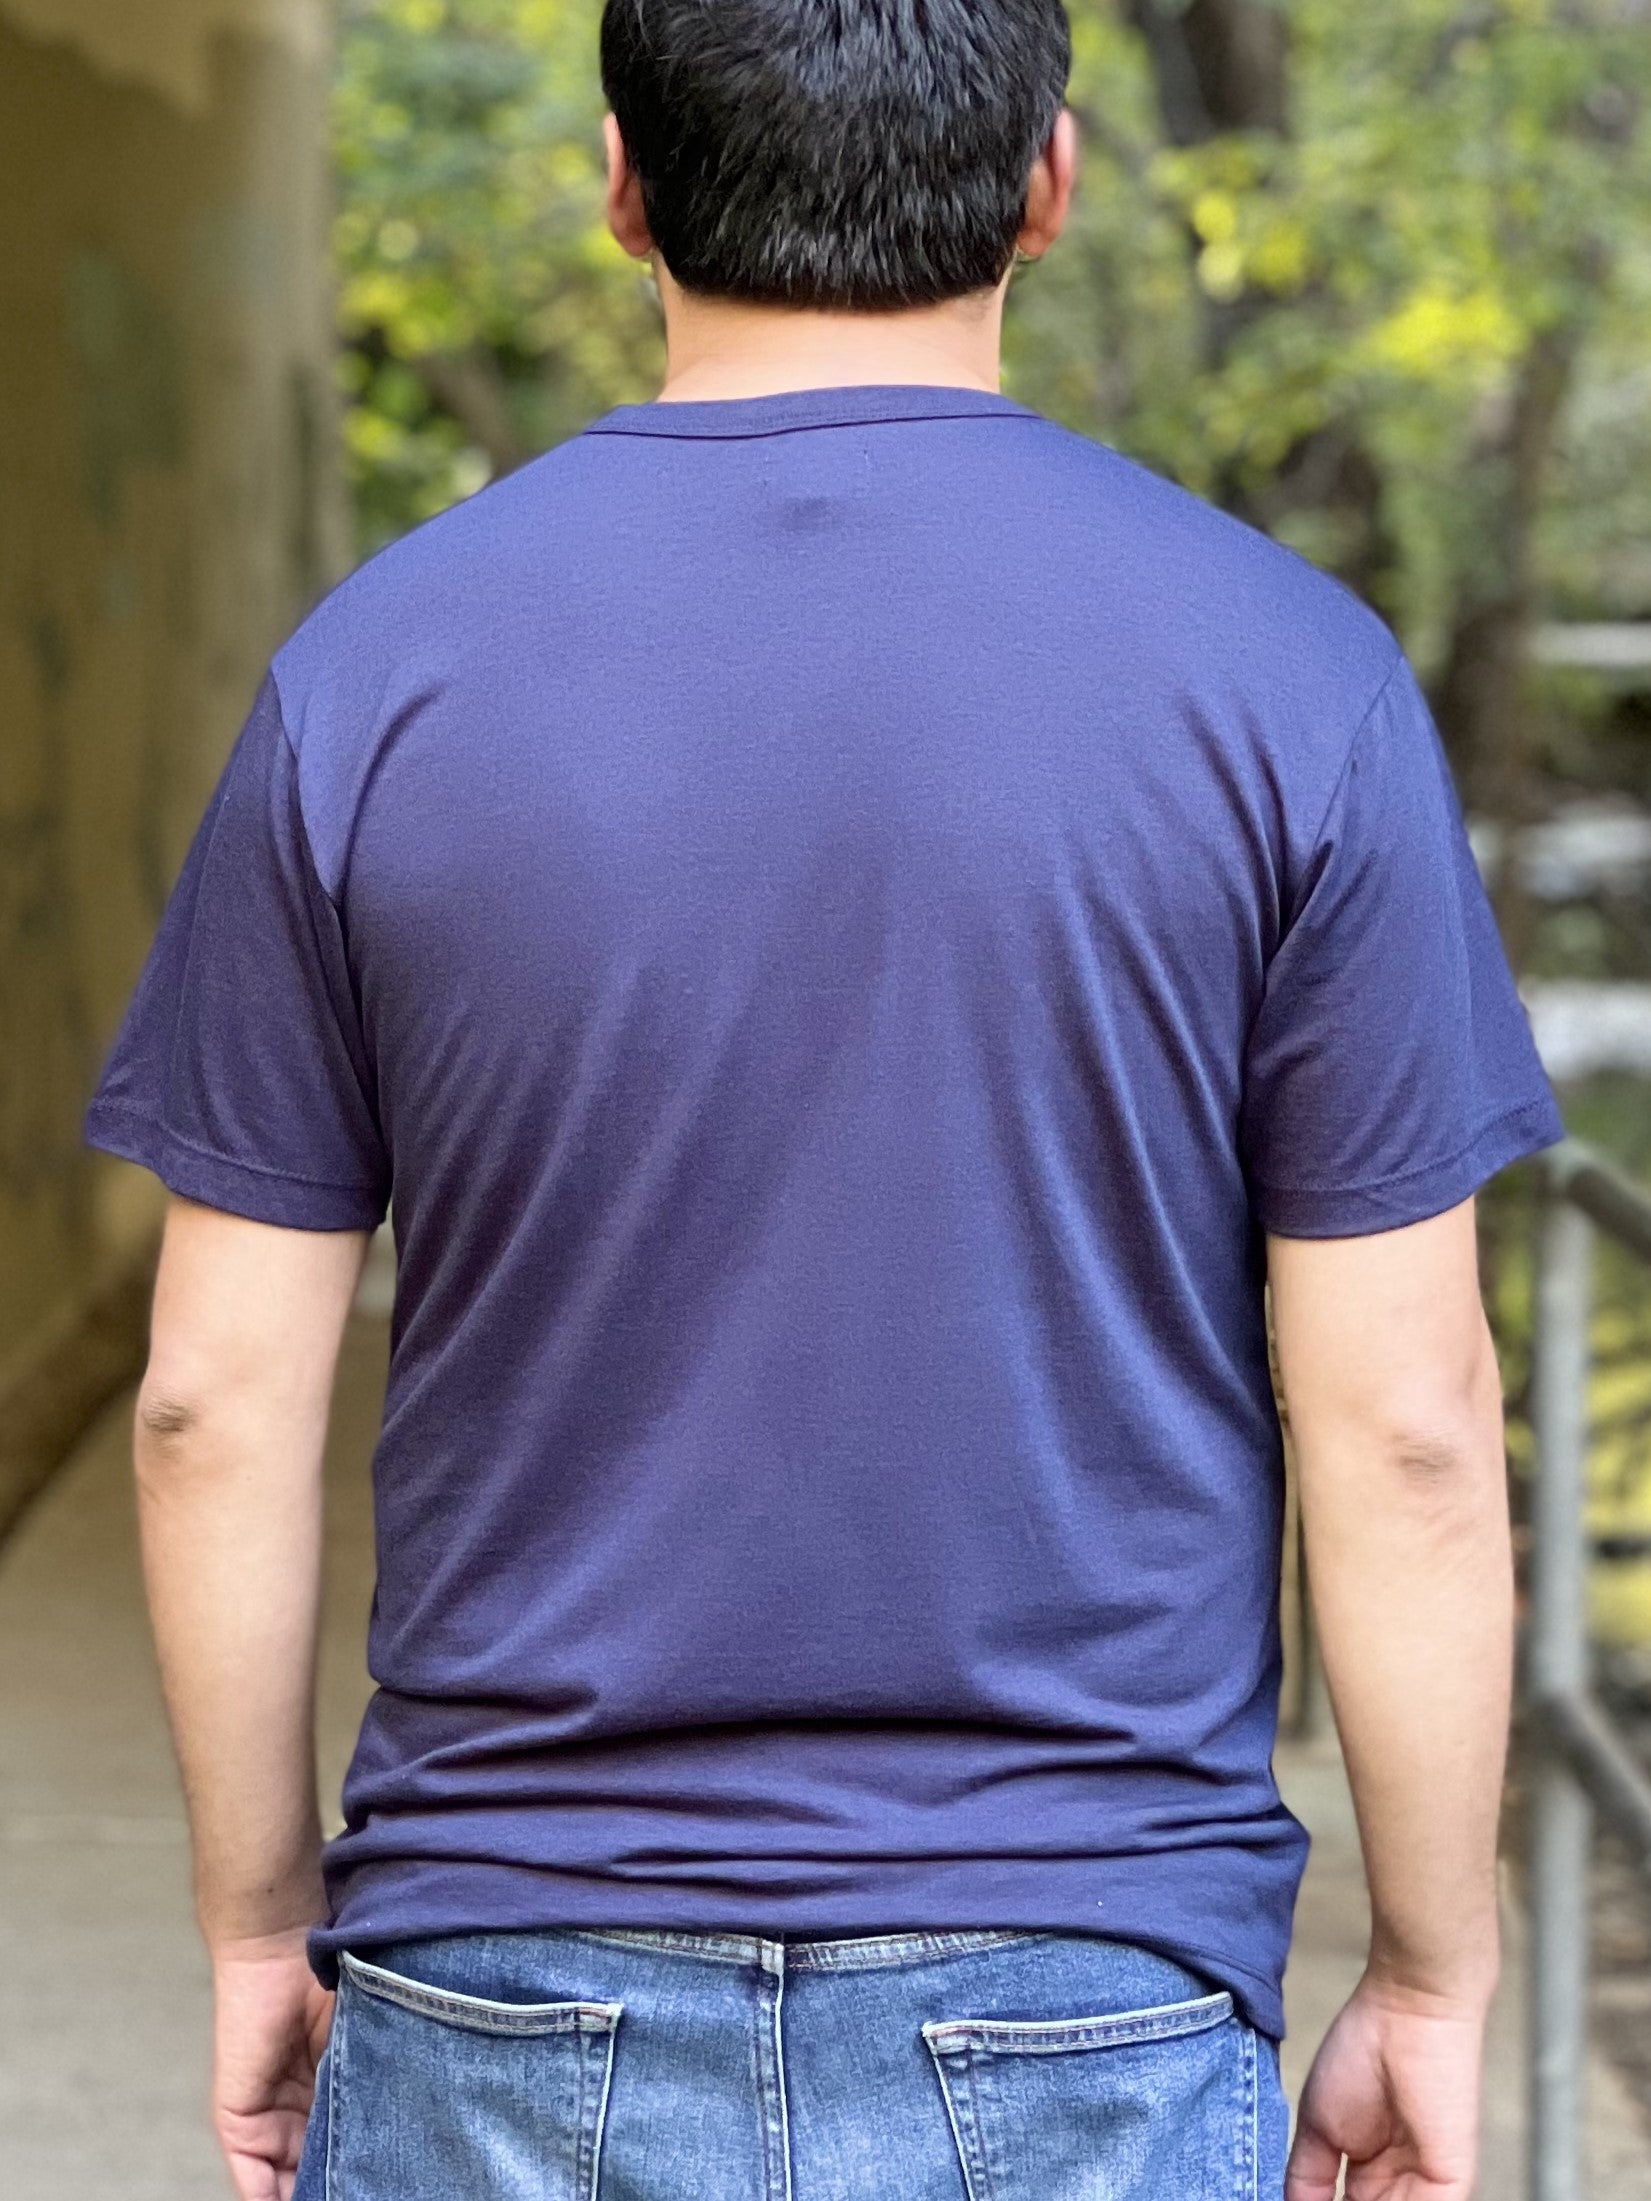 Back view of a man wearing a midnight blue t-shirt